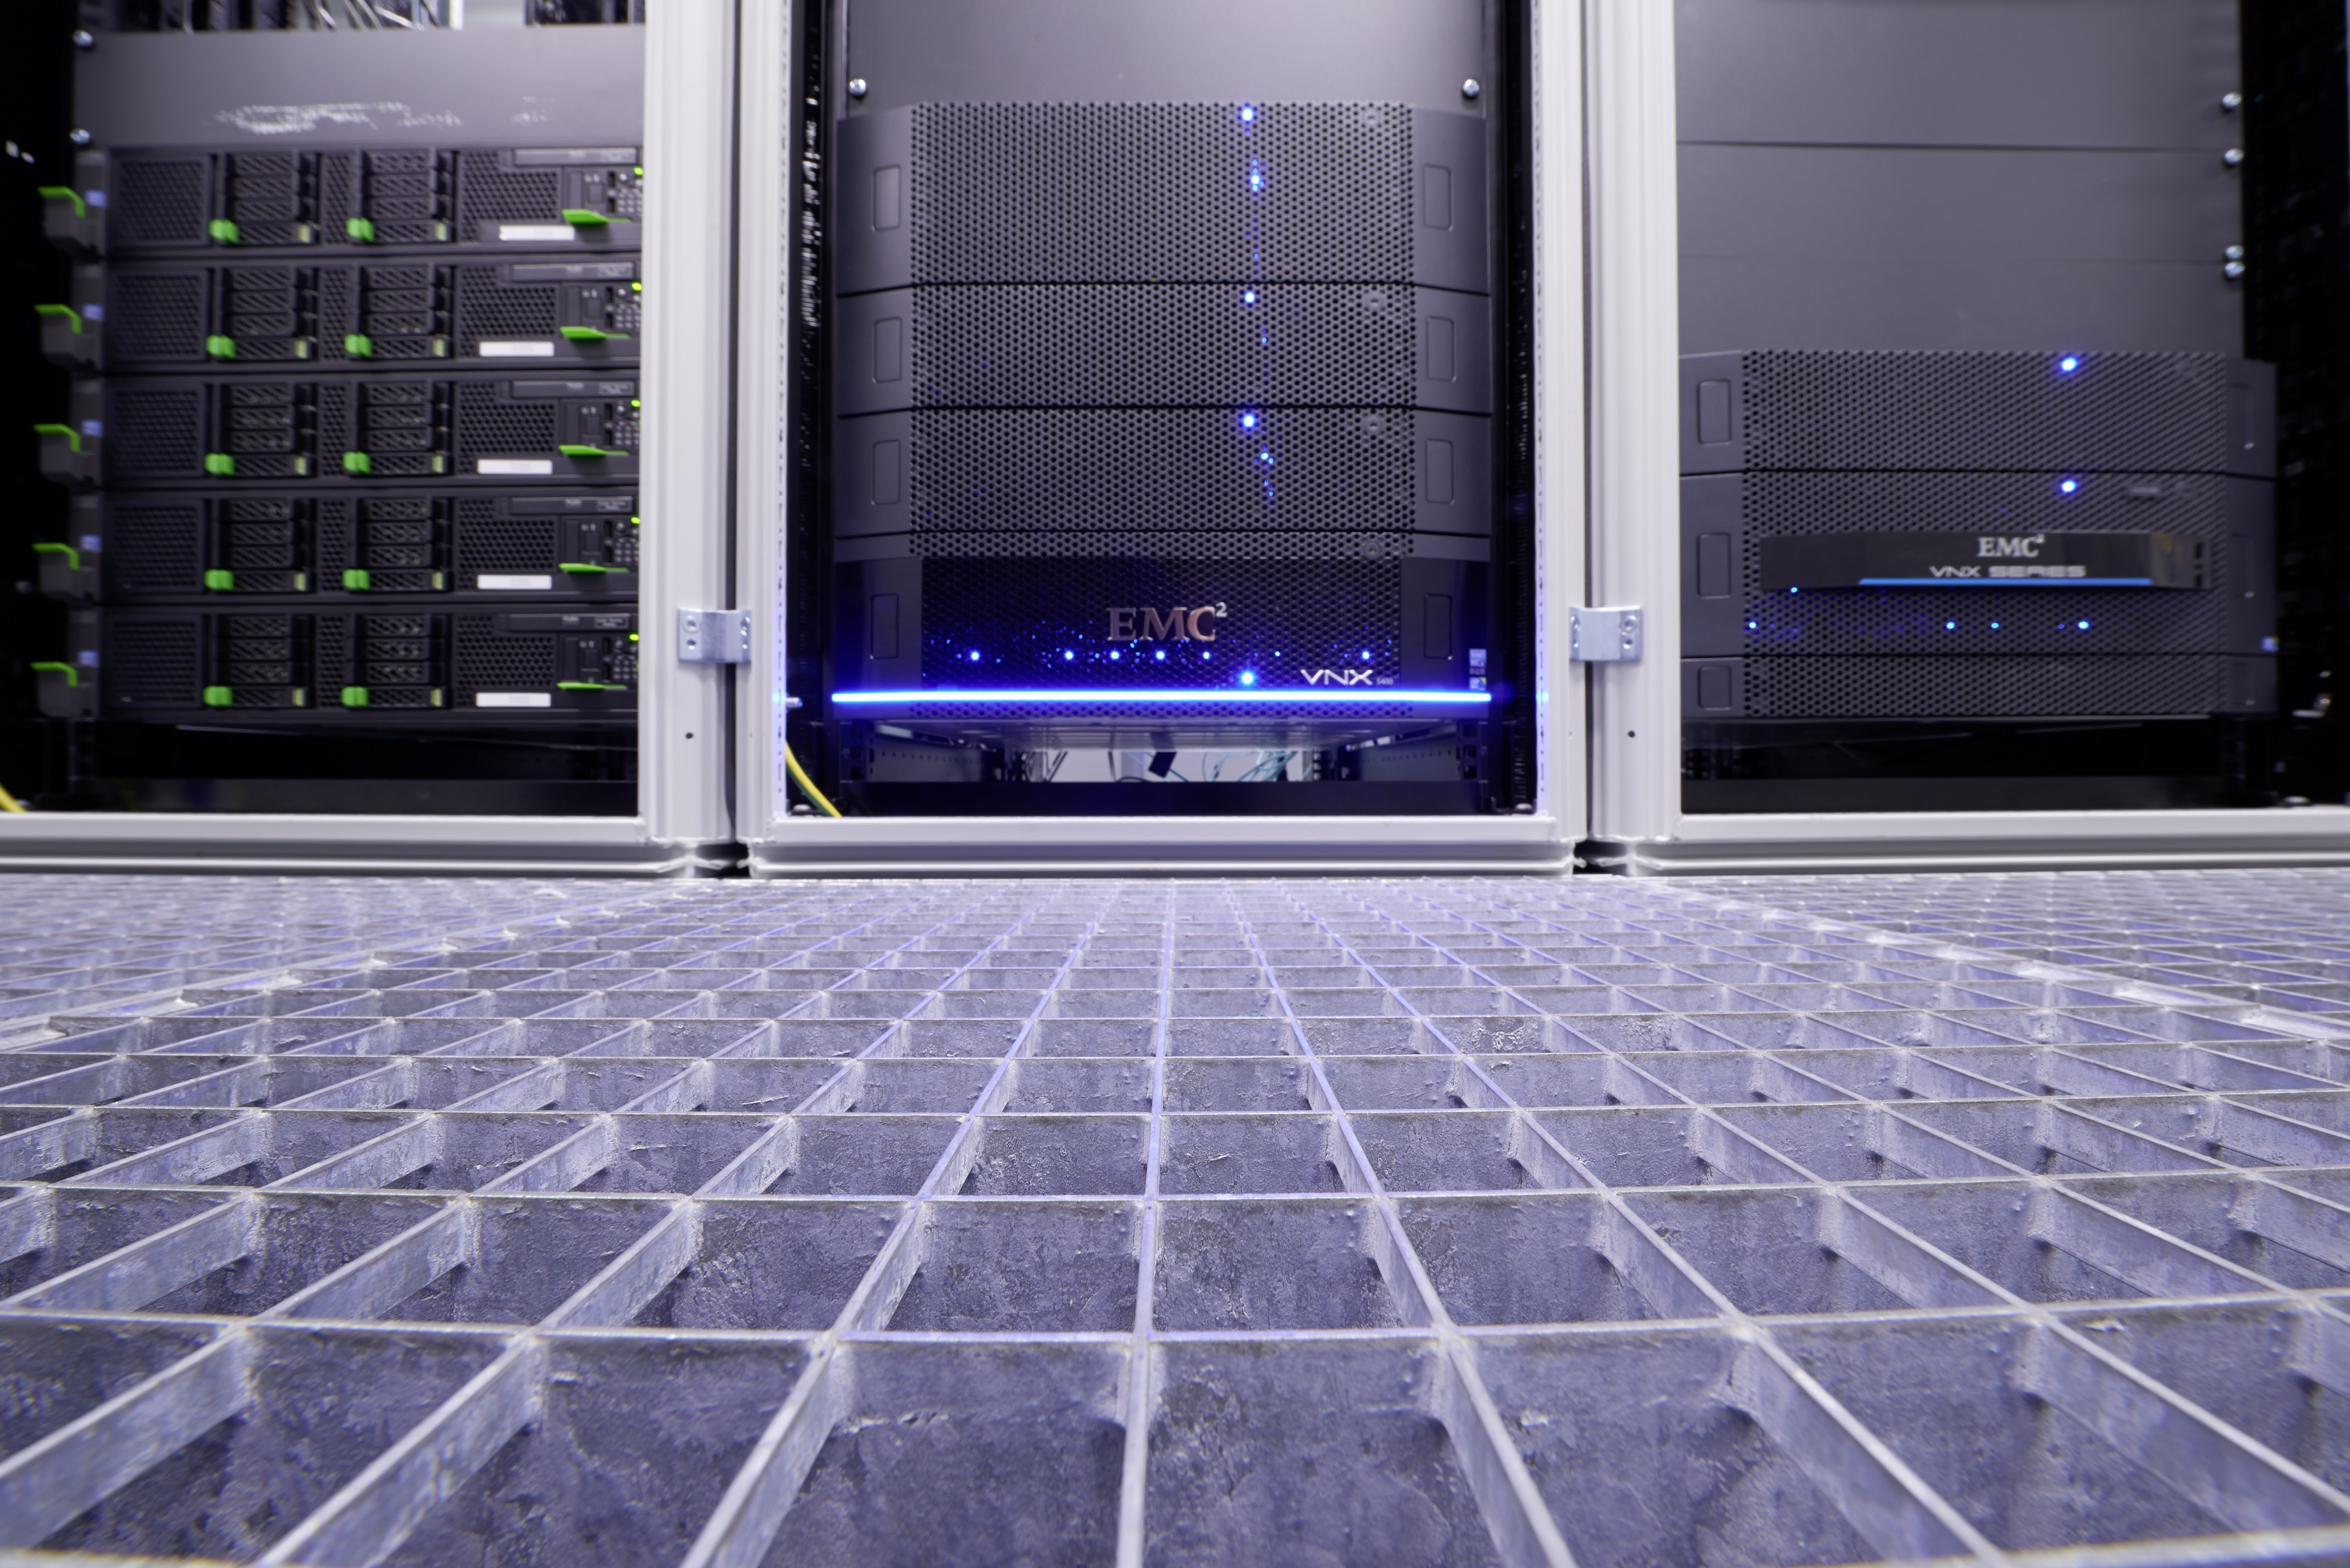 Dealing With Legacy Cooling Systems in Data Centres: Small Changes Can Make BIG Differences!